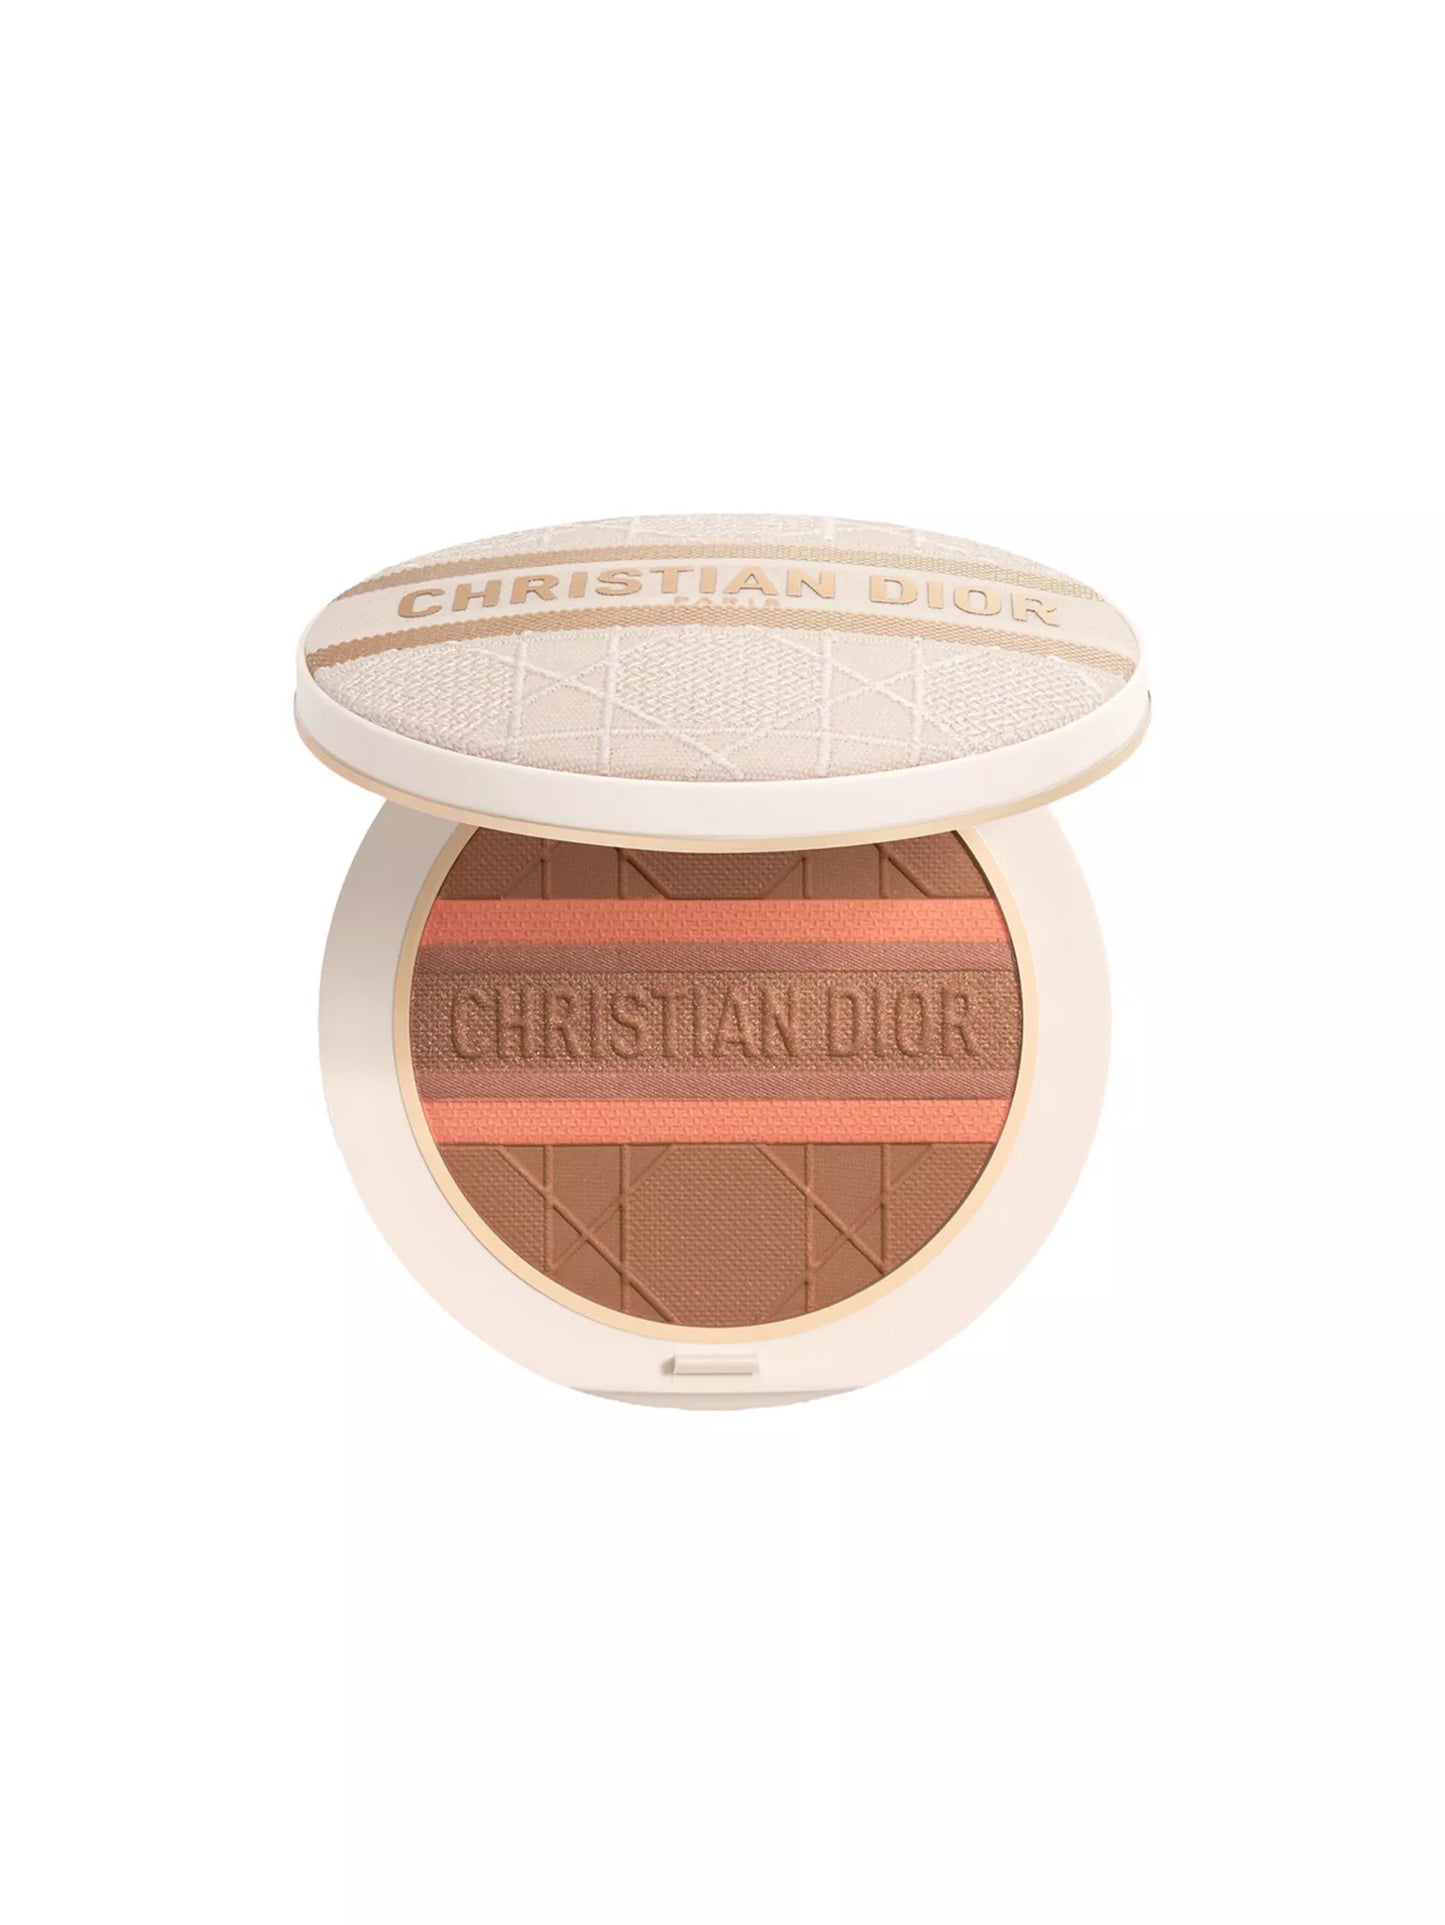 DIOR Dior Forever Natural Bronze Glow - Limited Edition 8g,